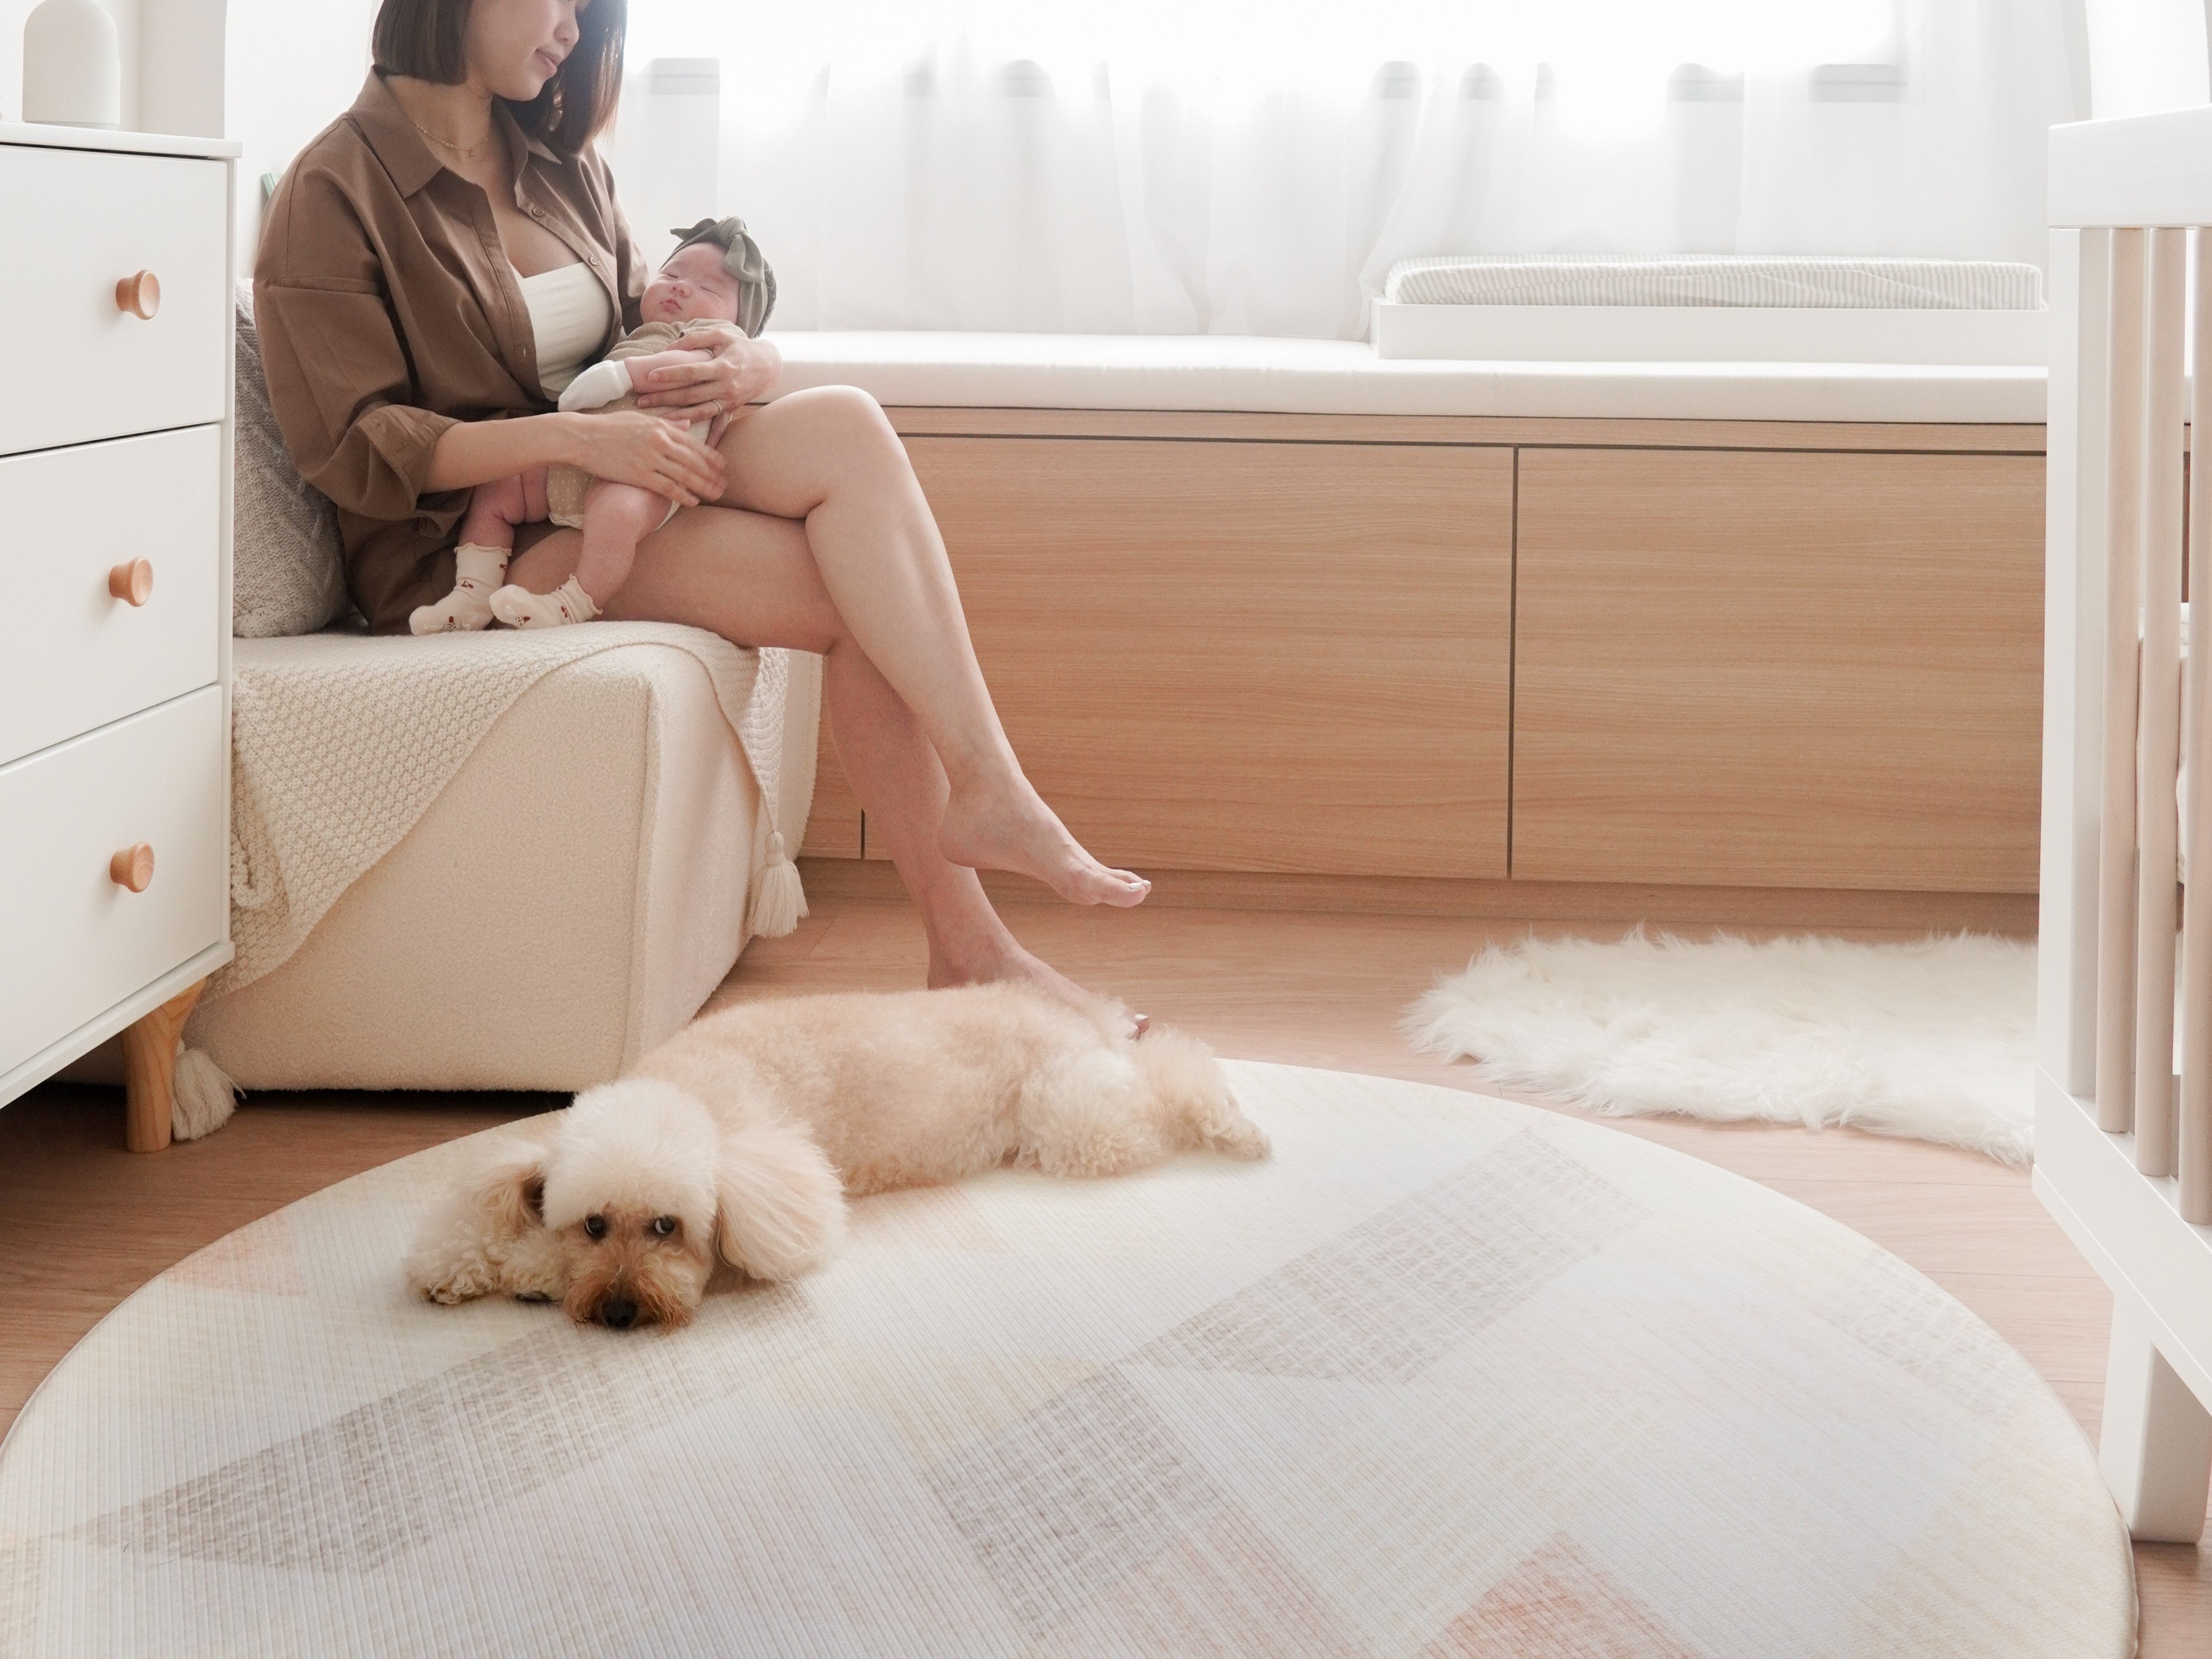 mom and baby on couch with dog resting on lollibly sand dune play mat